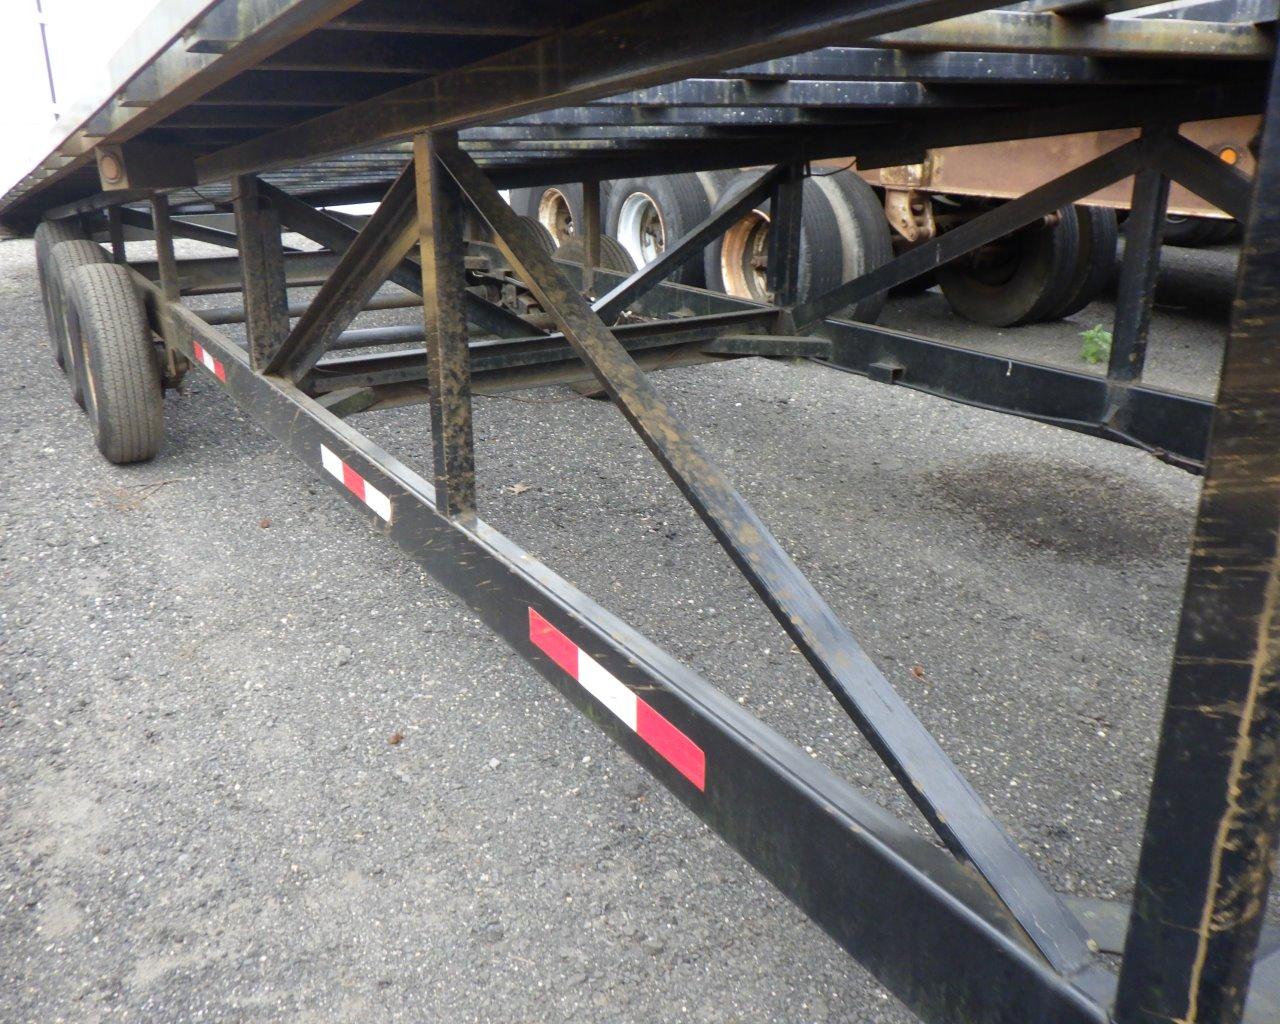 2011 DOWN TO EARTH 3 Car Wedge Trailer (TAX COLLECTED FOR DEALER) s/n:5MYWW